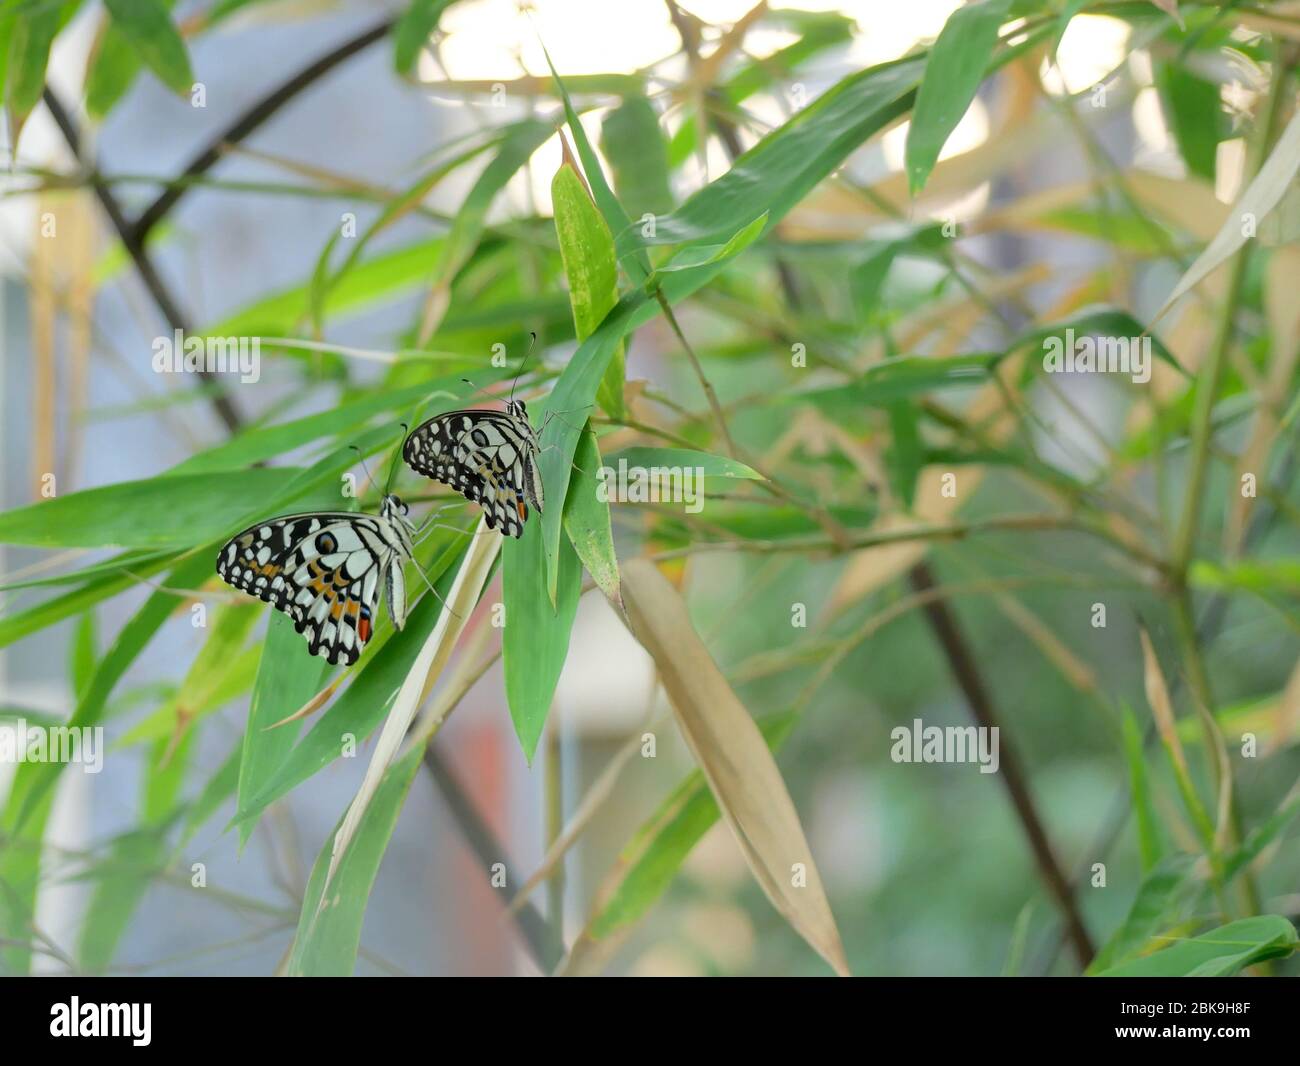 Two beautiful lime butterflies, lemon butterfly, or chequered swallowtail (Papilio demoleus) on bamboo tree Stock Photo